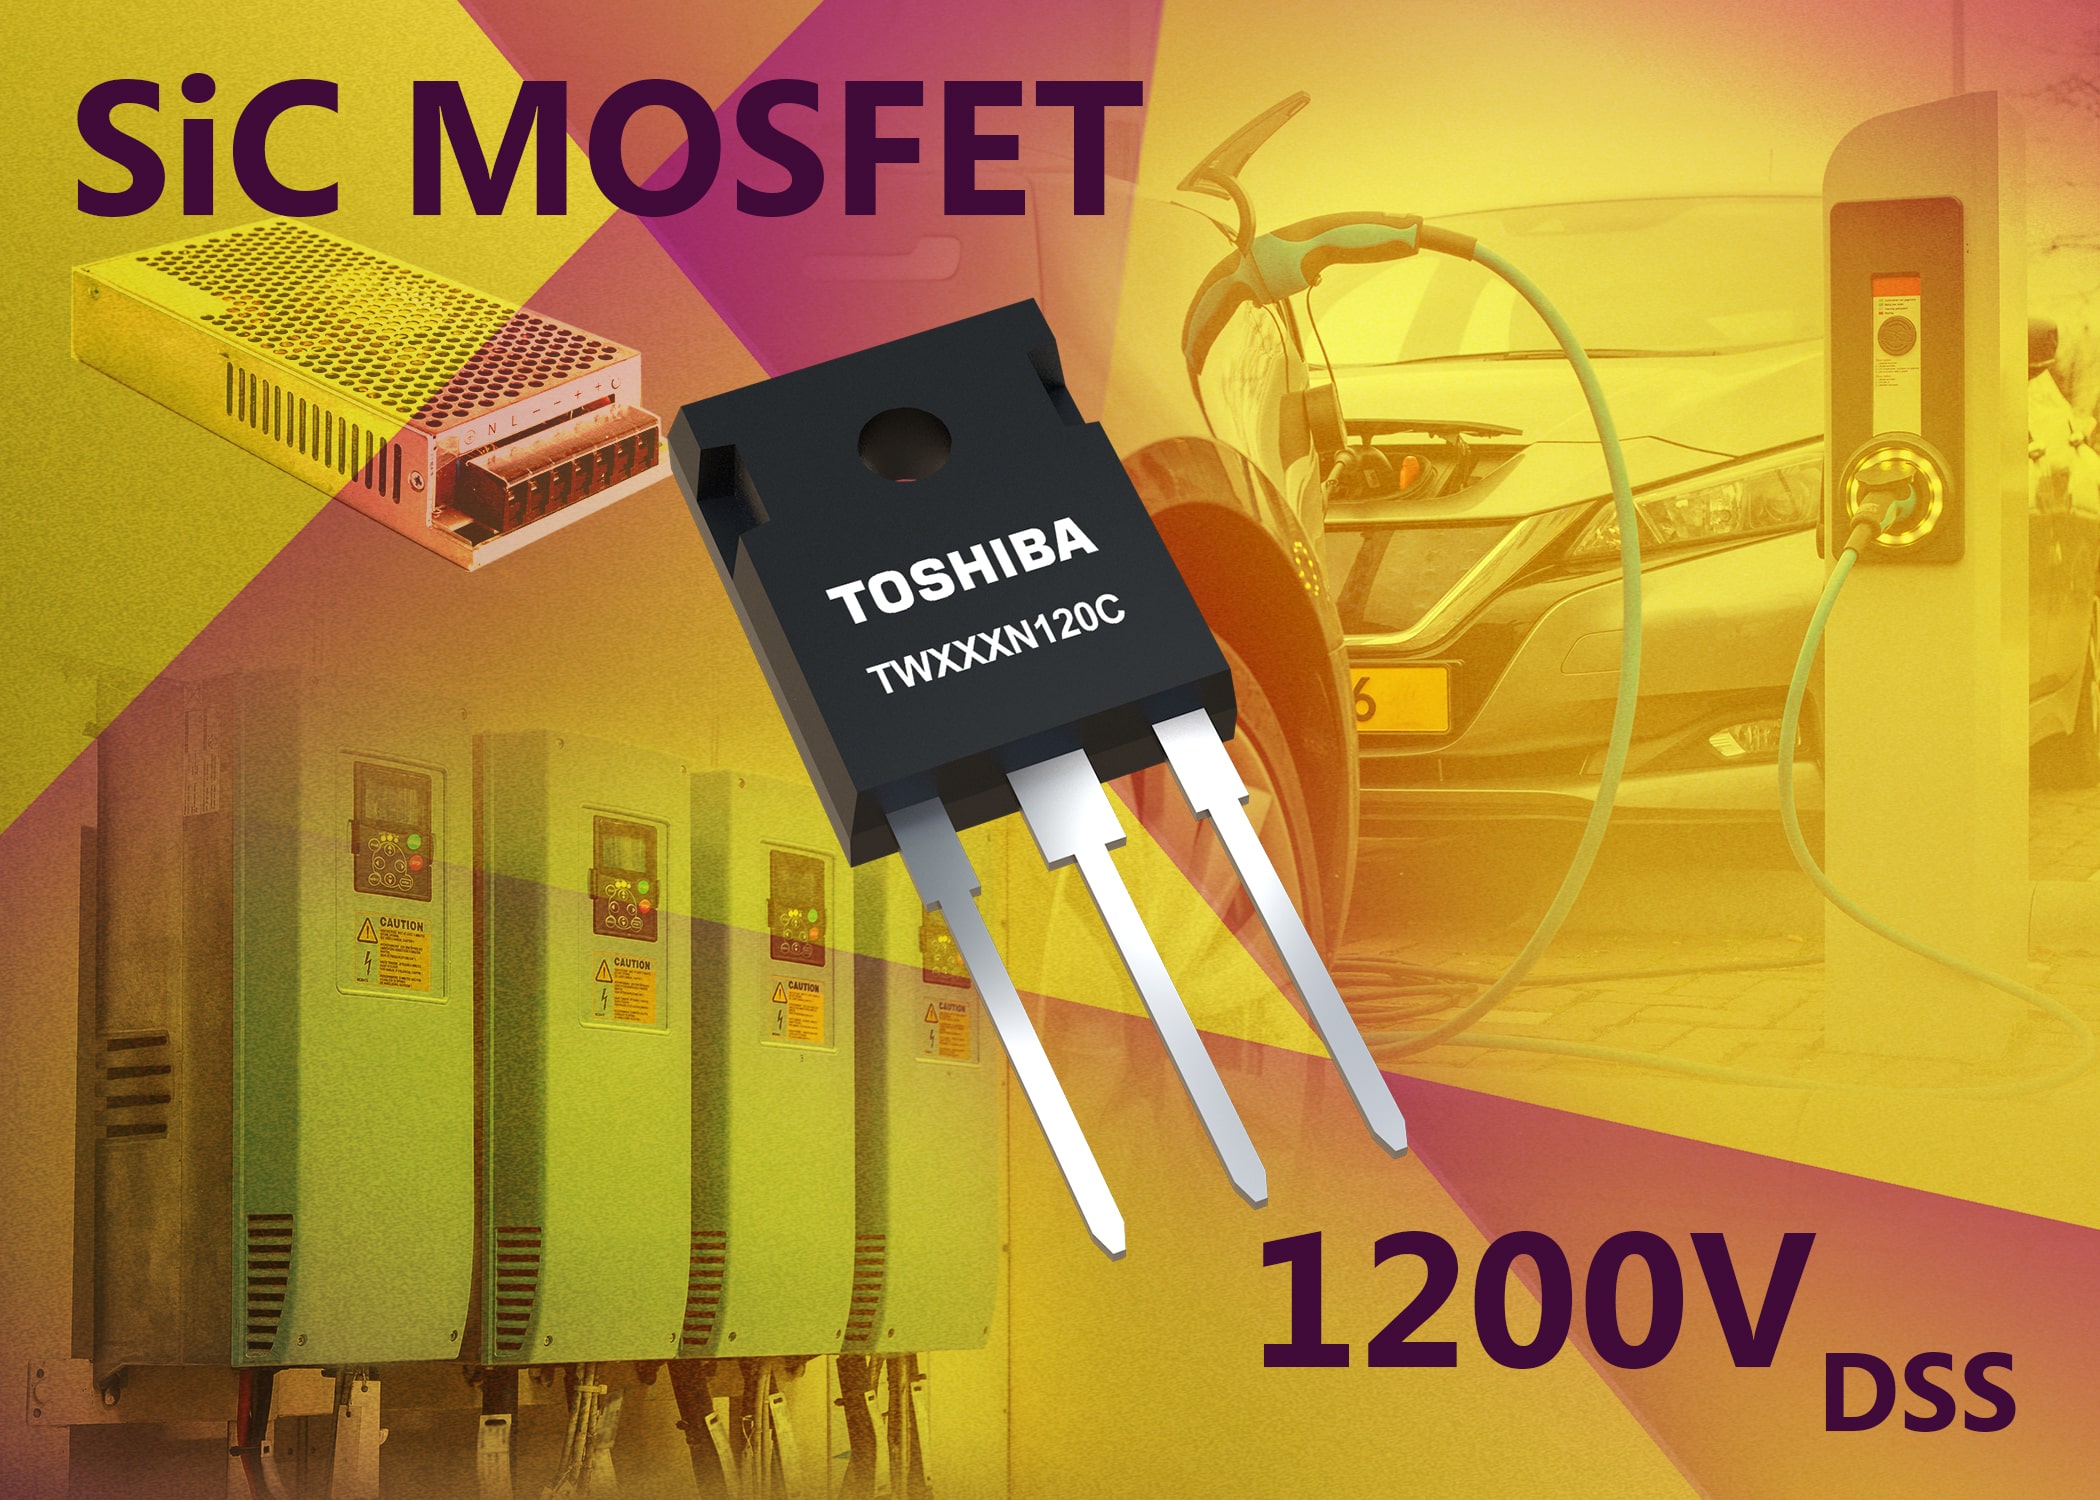 Third-Generation 1200V SiC MOSFETs Boost Industrial Power-Conversion Efficiency